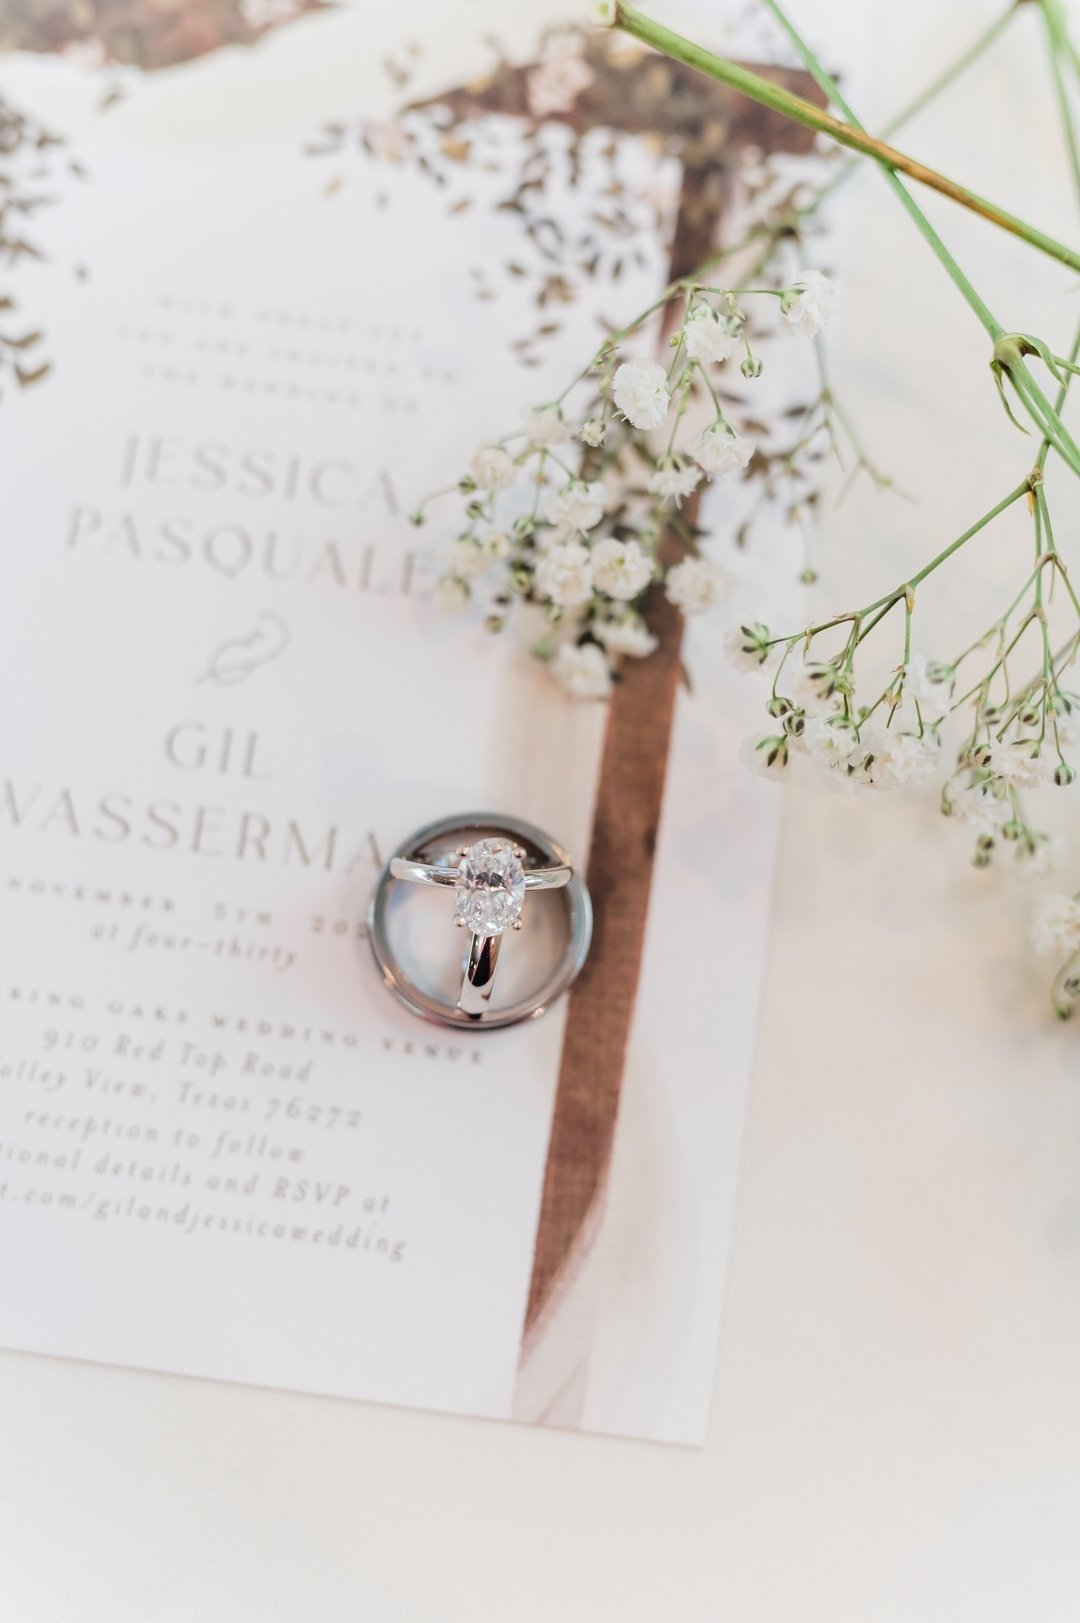 A new trend I am honestly thrilled to see if the use of Baby's Breath!

I feel like it had the mason jar and barn connotation for SO long, but times are changing! 
I've seen so many incredible ways that couples have been using Baby's Breath to elevat